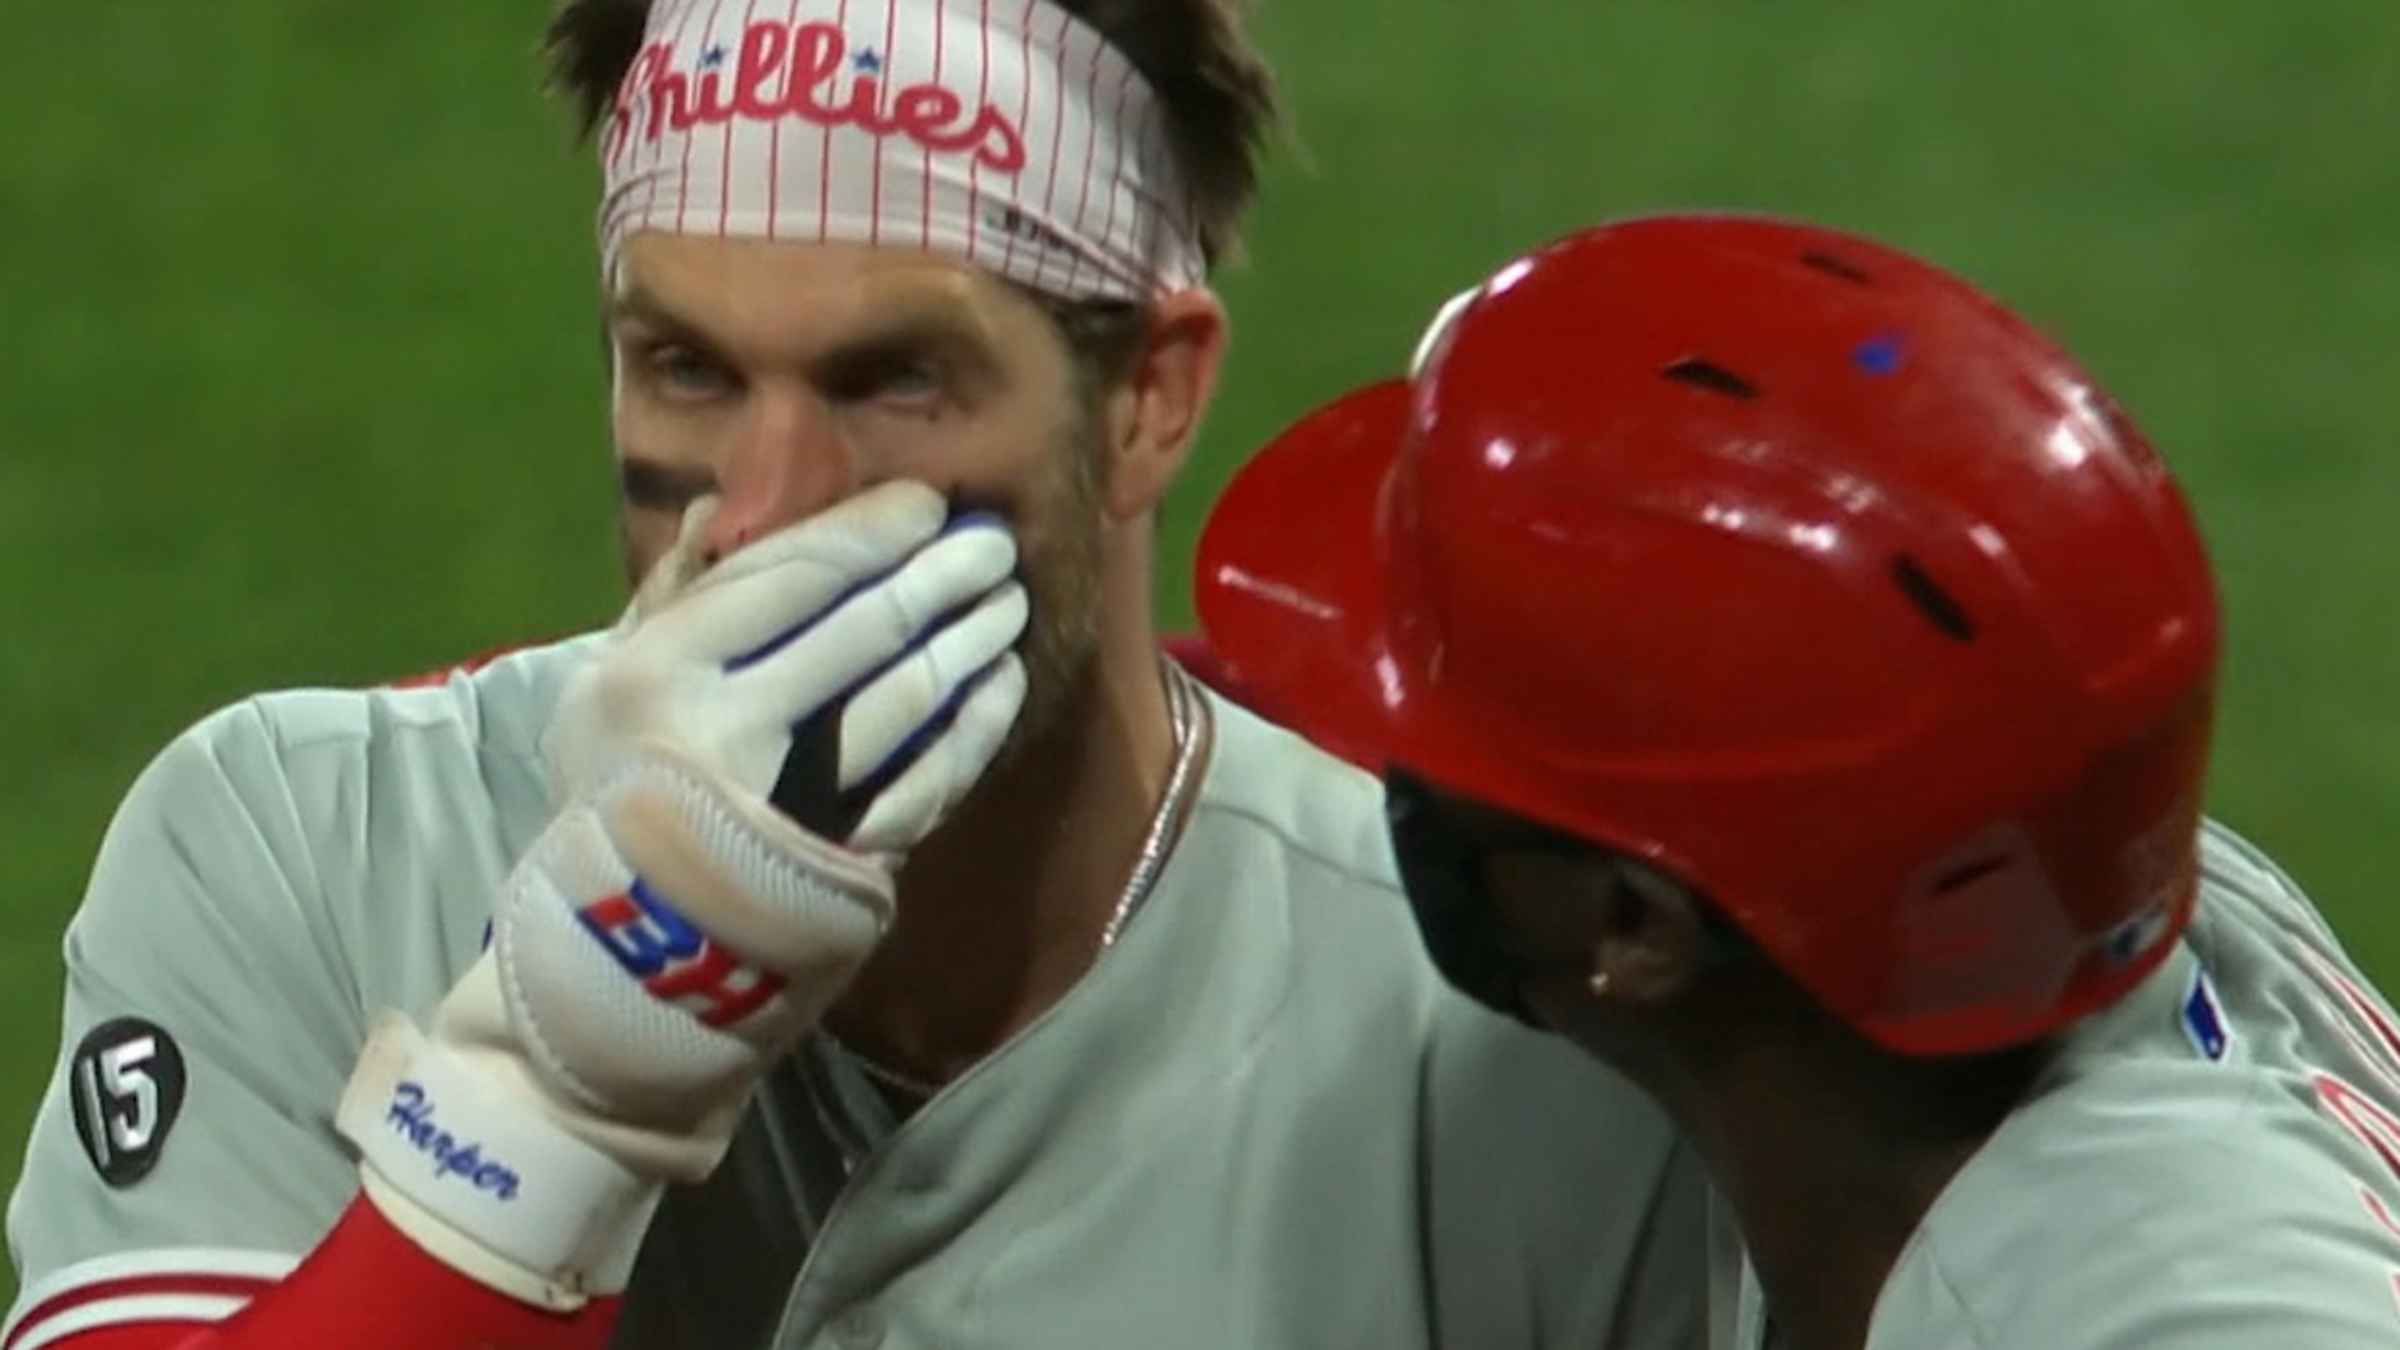 Bryce Harper exits after being hit in face by pitch